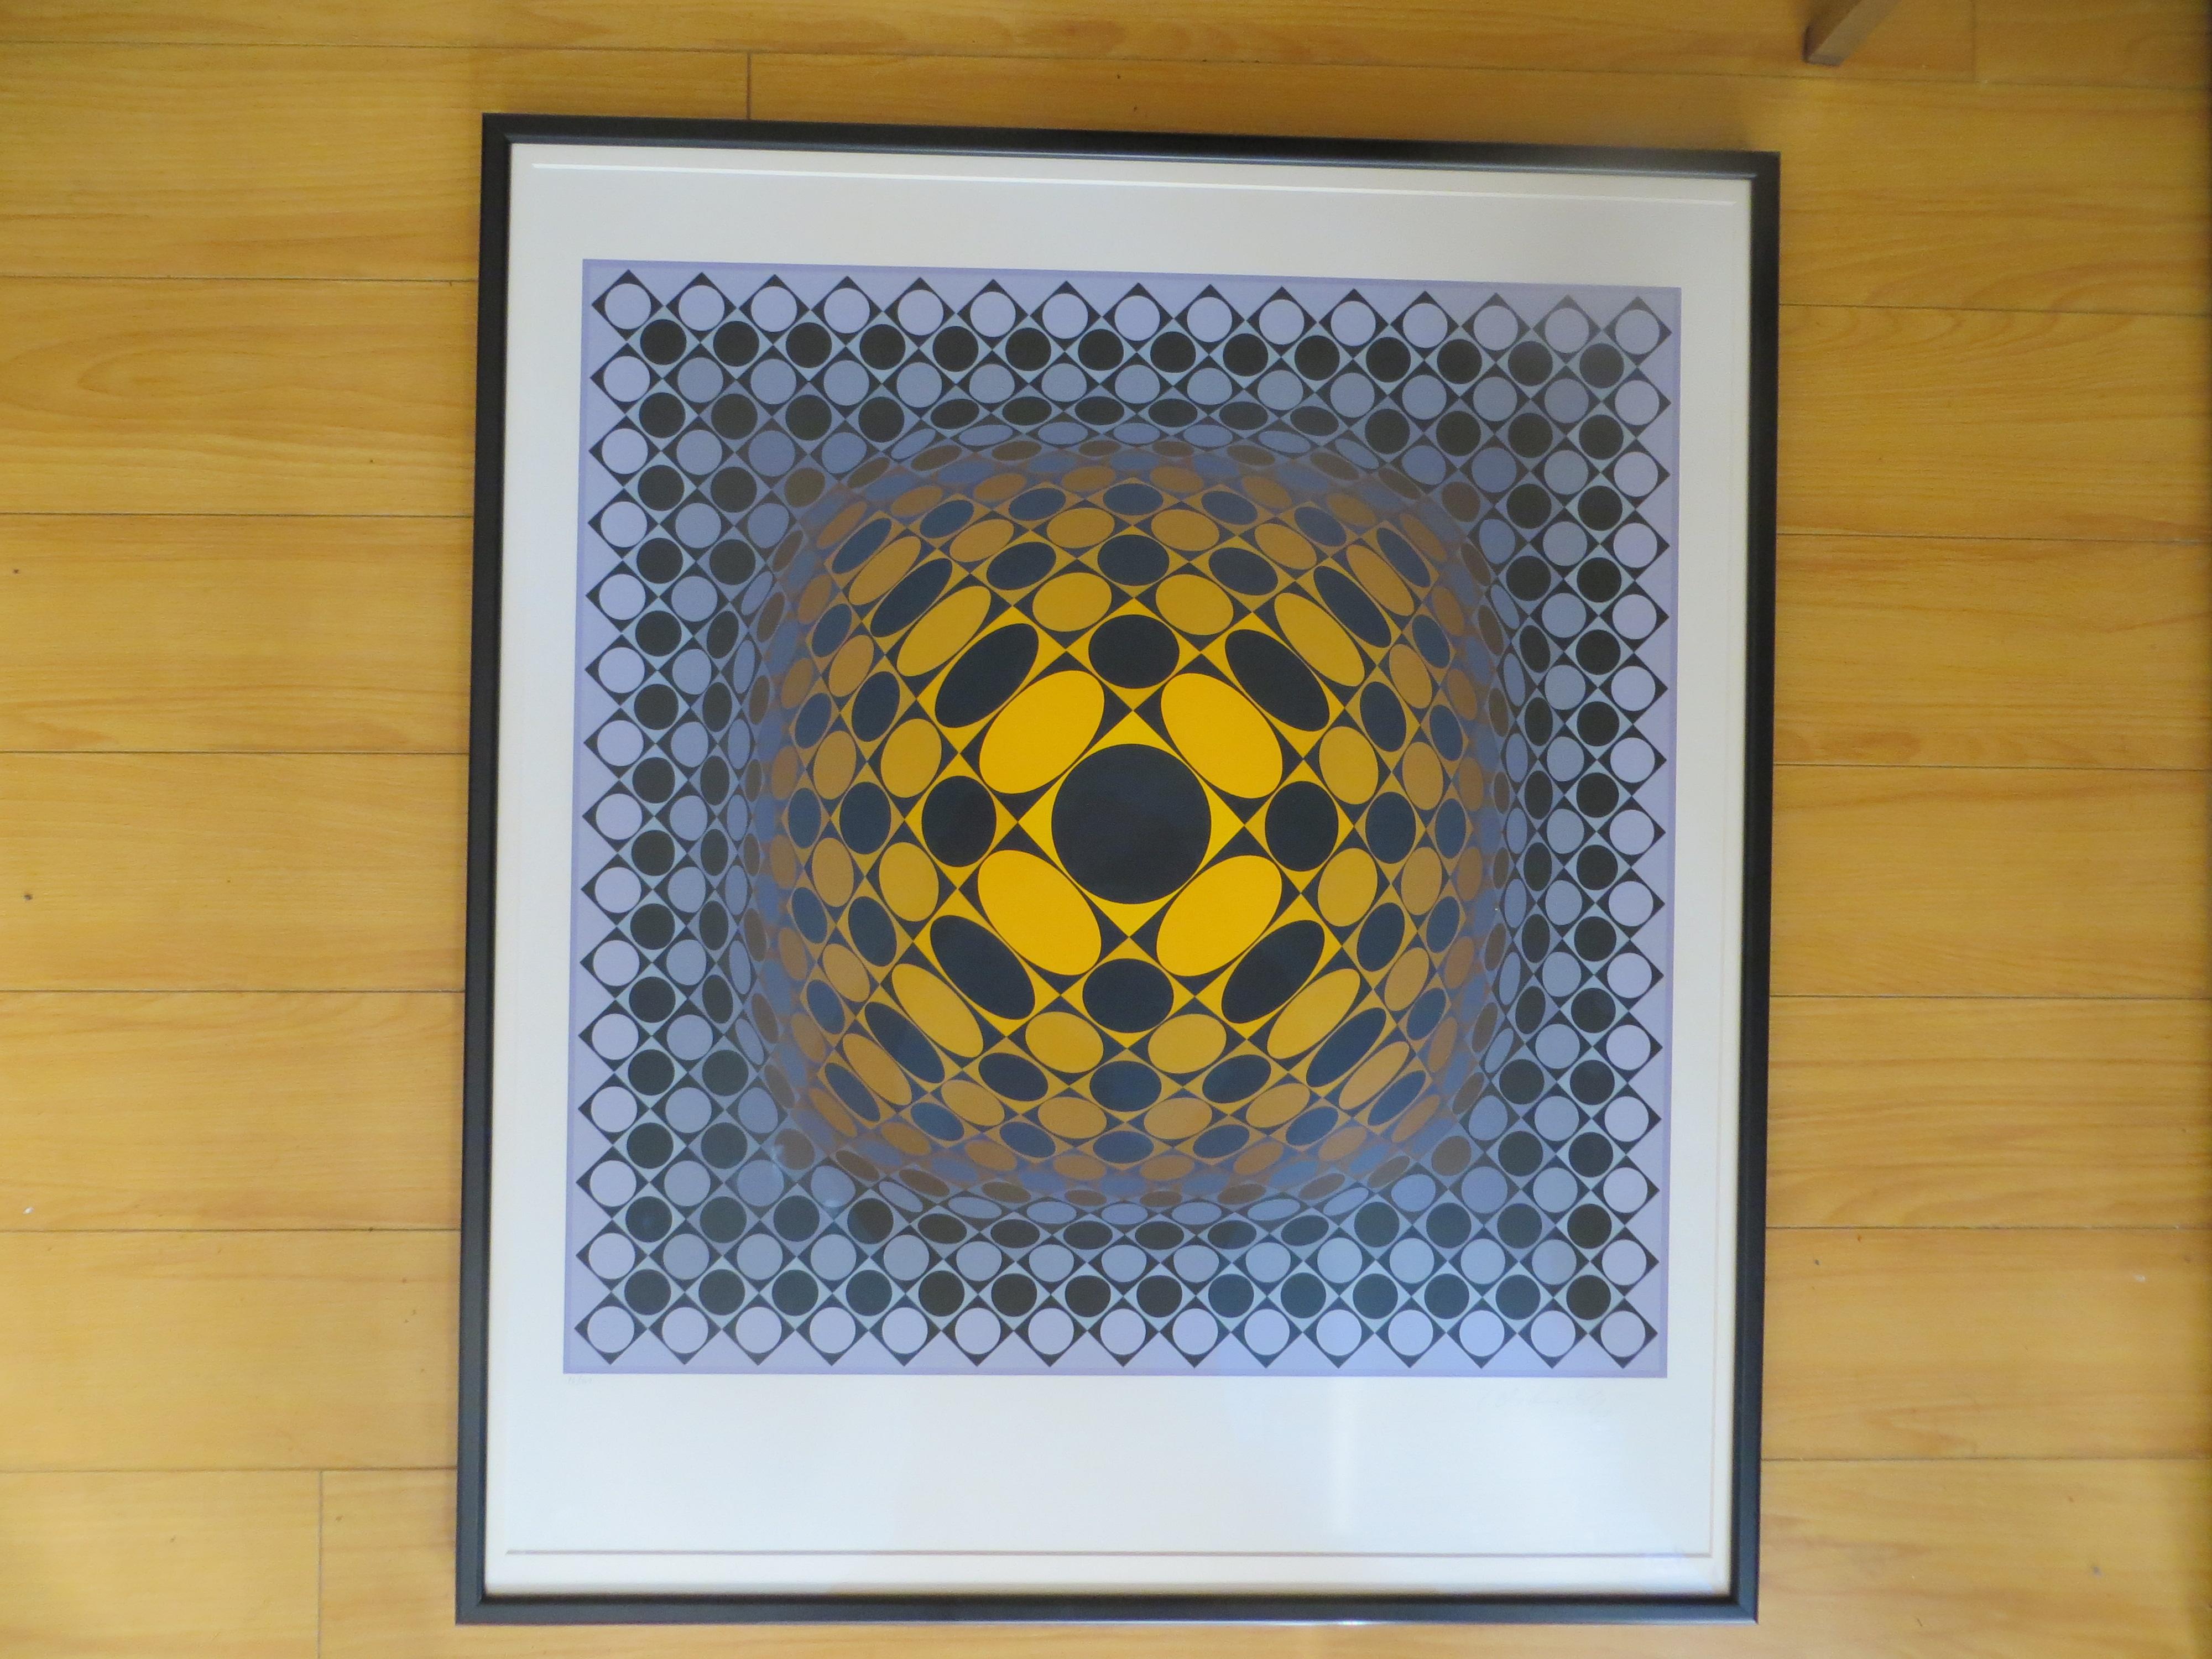 What type of art did Victor Vasarely do?